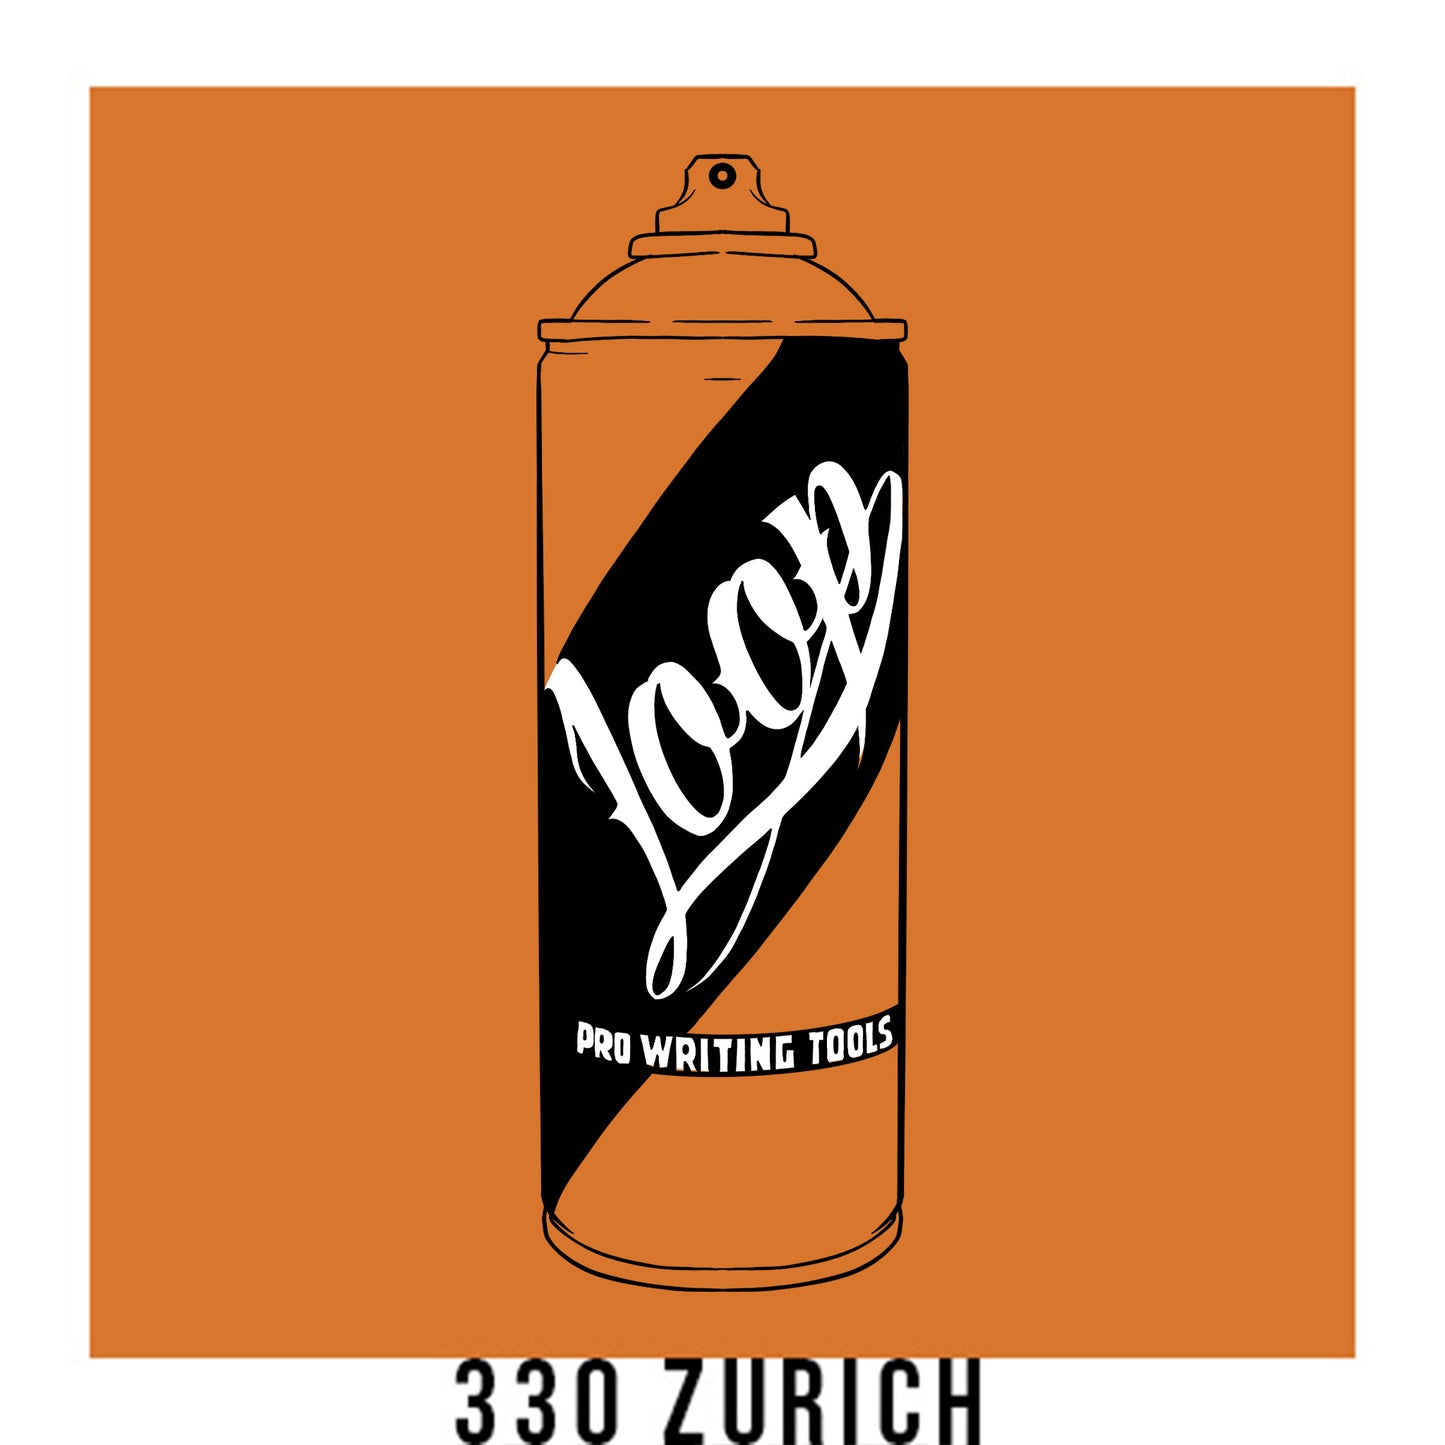 A black outline drawing of a orange spray paint can with the word "Loop" written on the face in script. The background is a color swatch of the same orange with a white border with the words "330 Zurich" at the bottom.